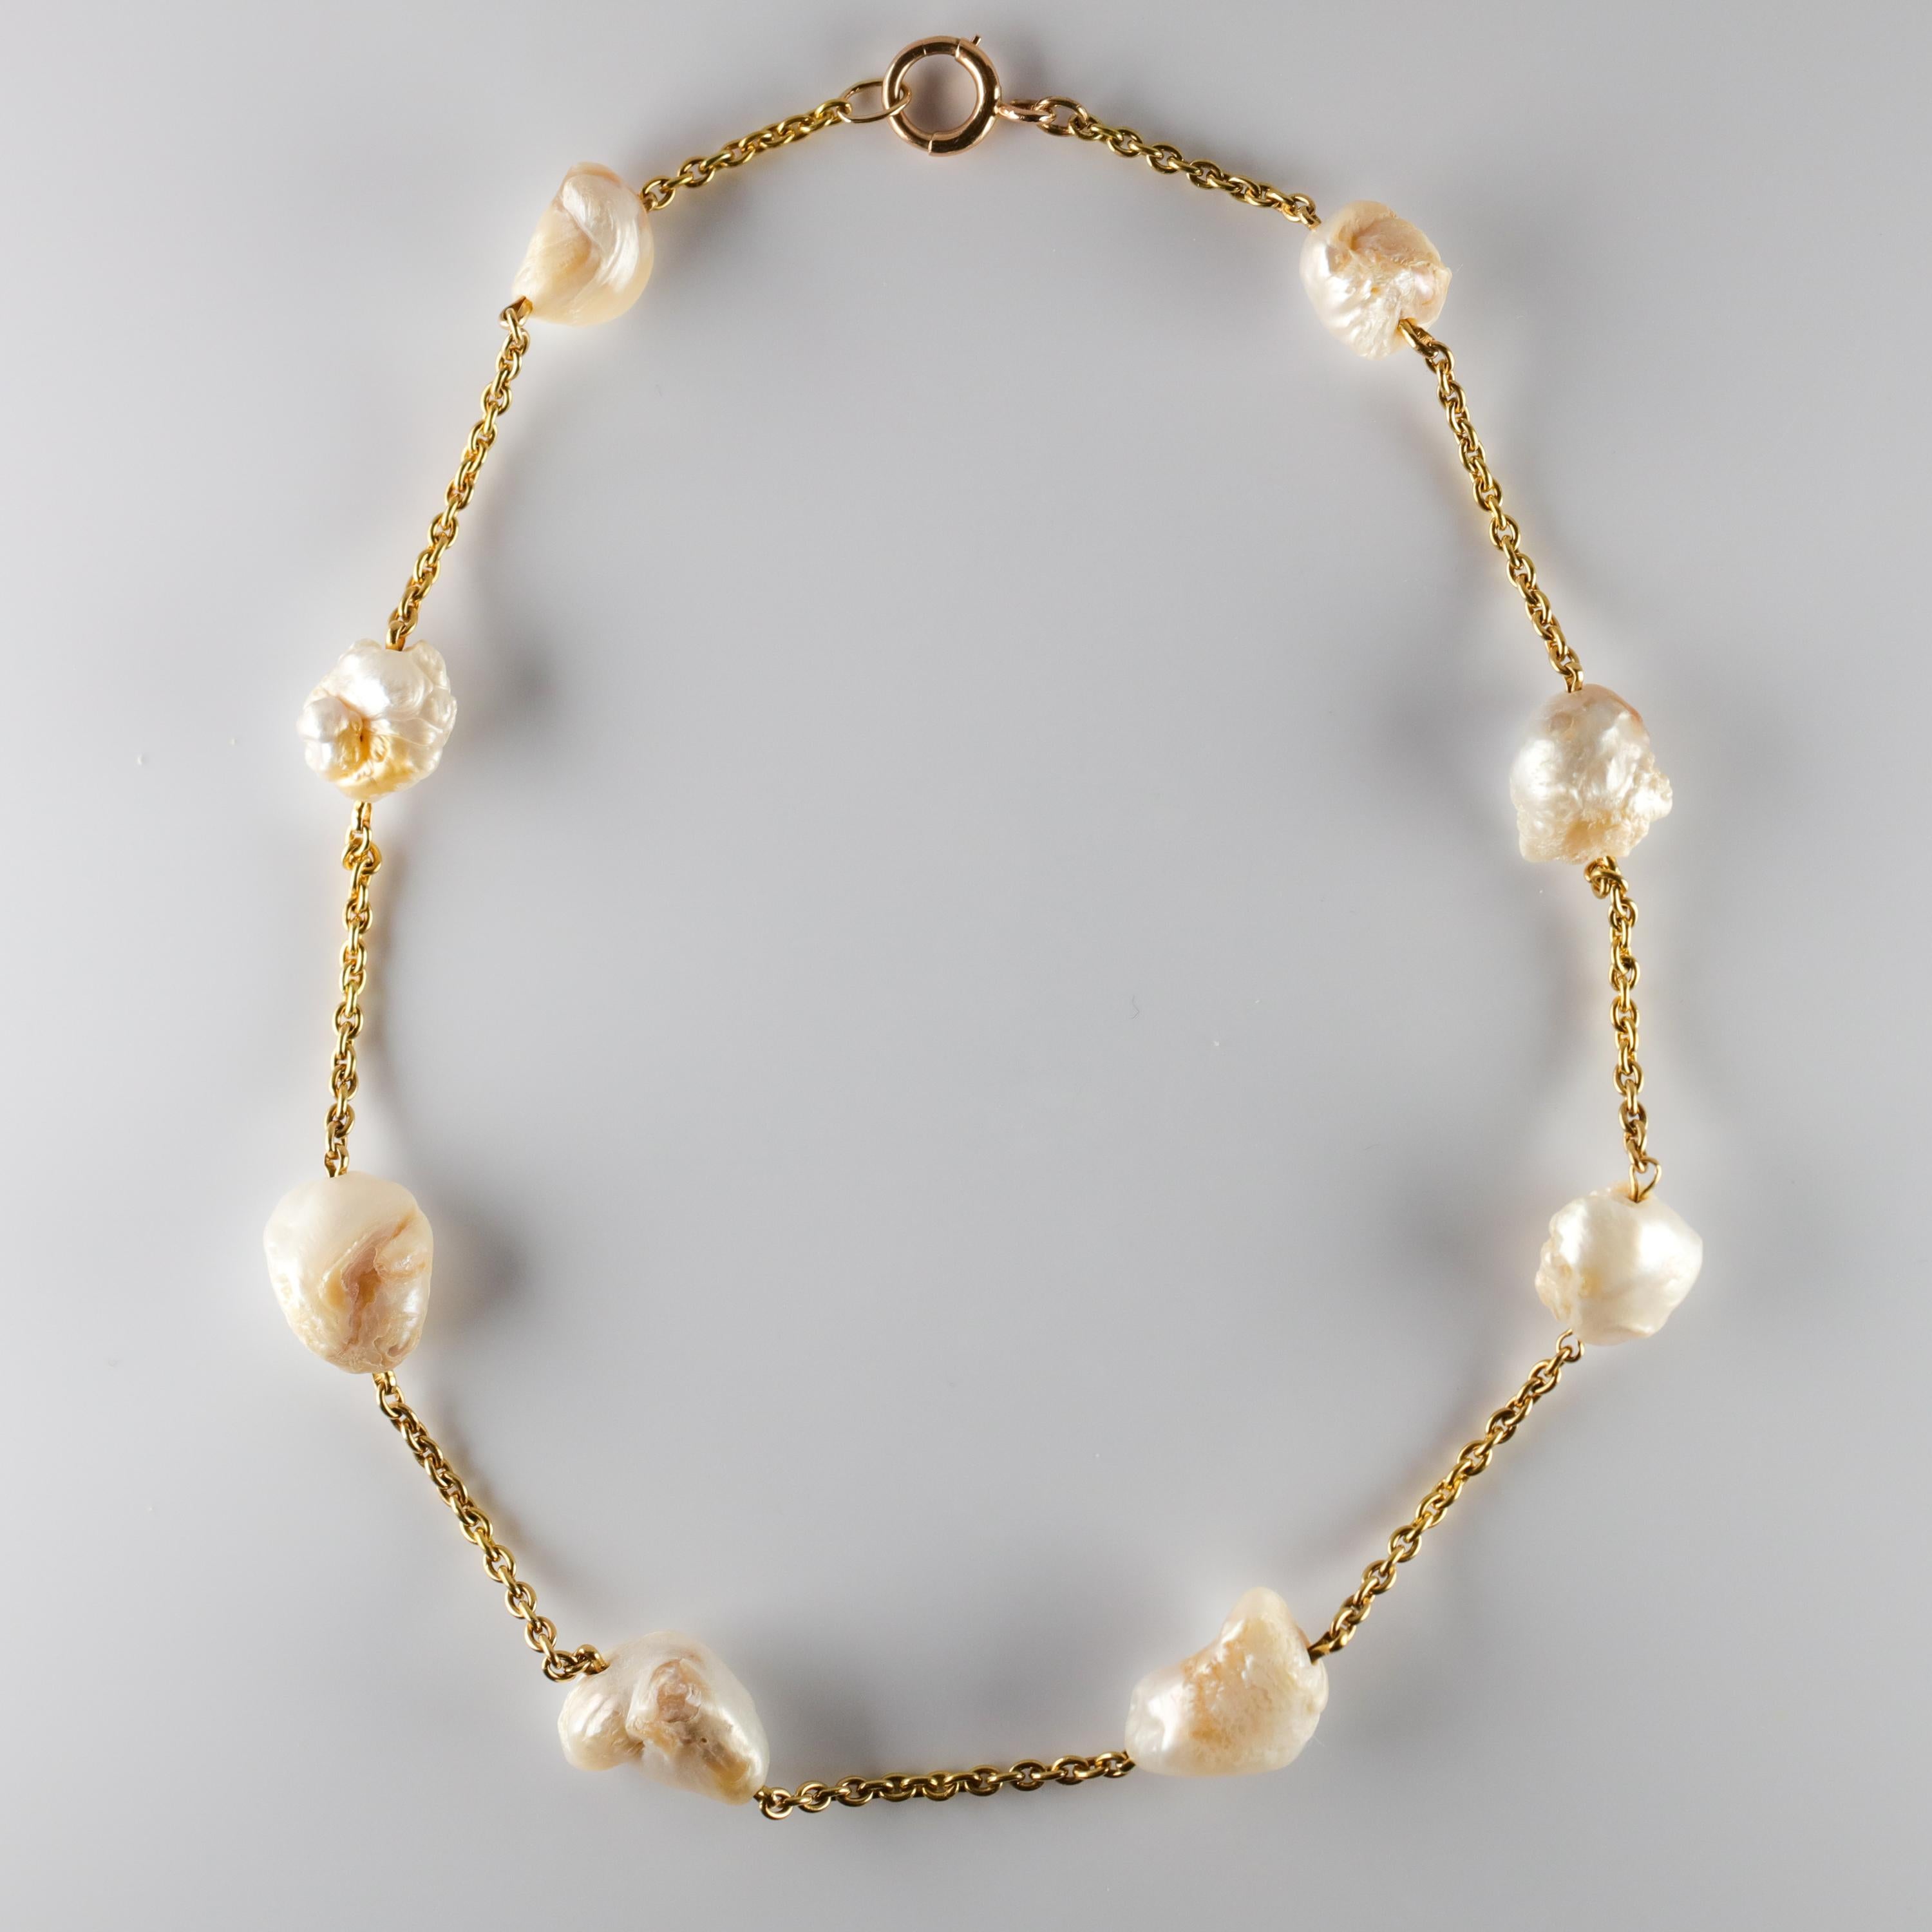 Pearl Necklace of Rare Oversized Mississippi River Pearls 6